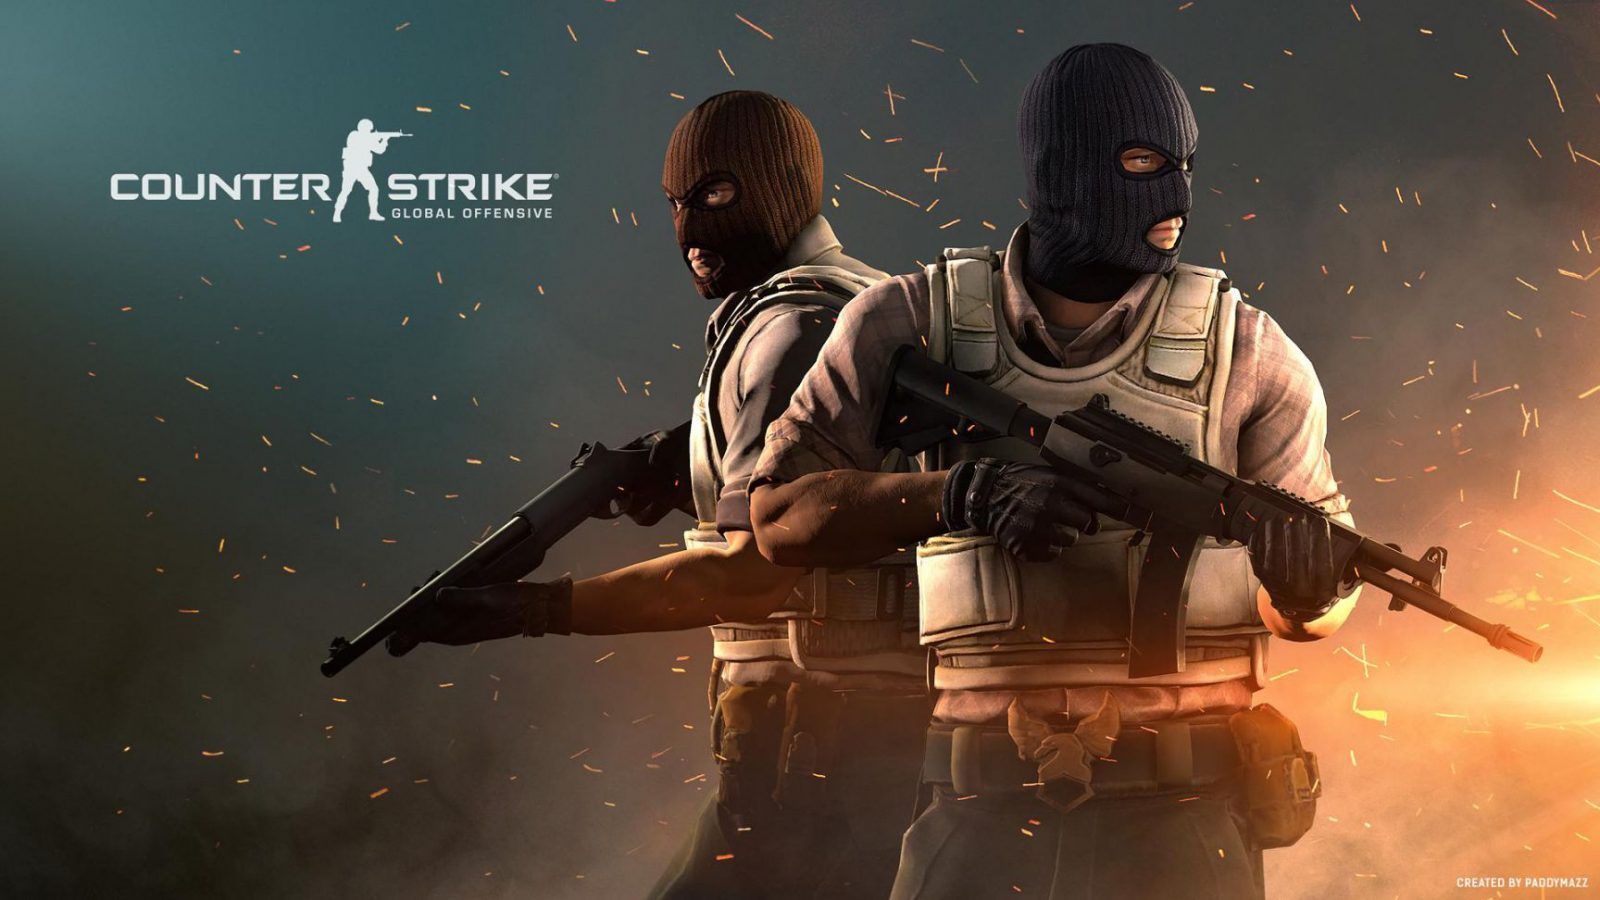 Counter Strike Global Offensive cover image